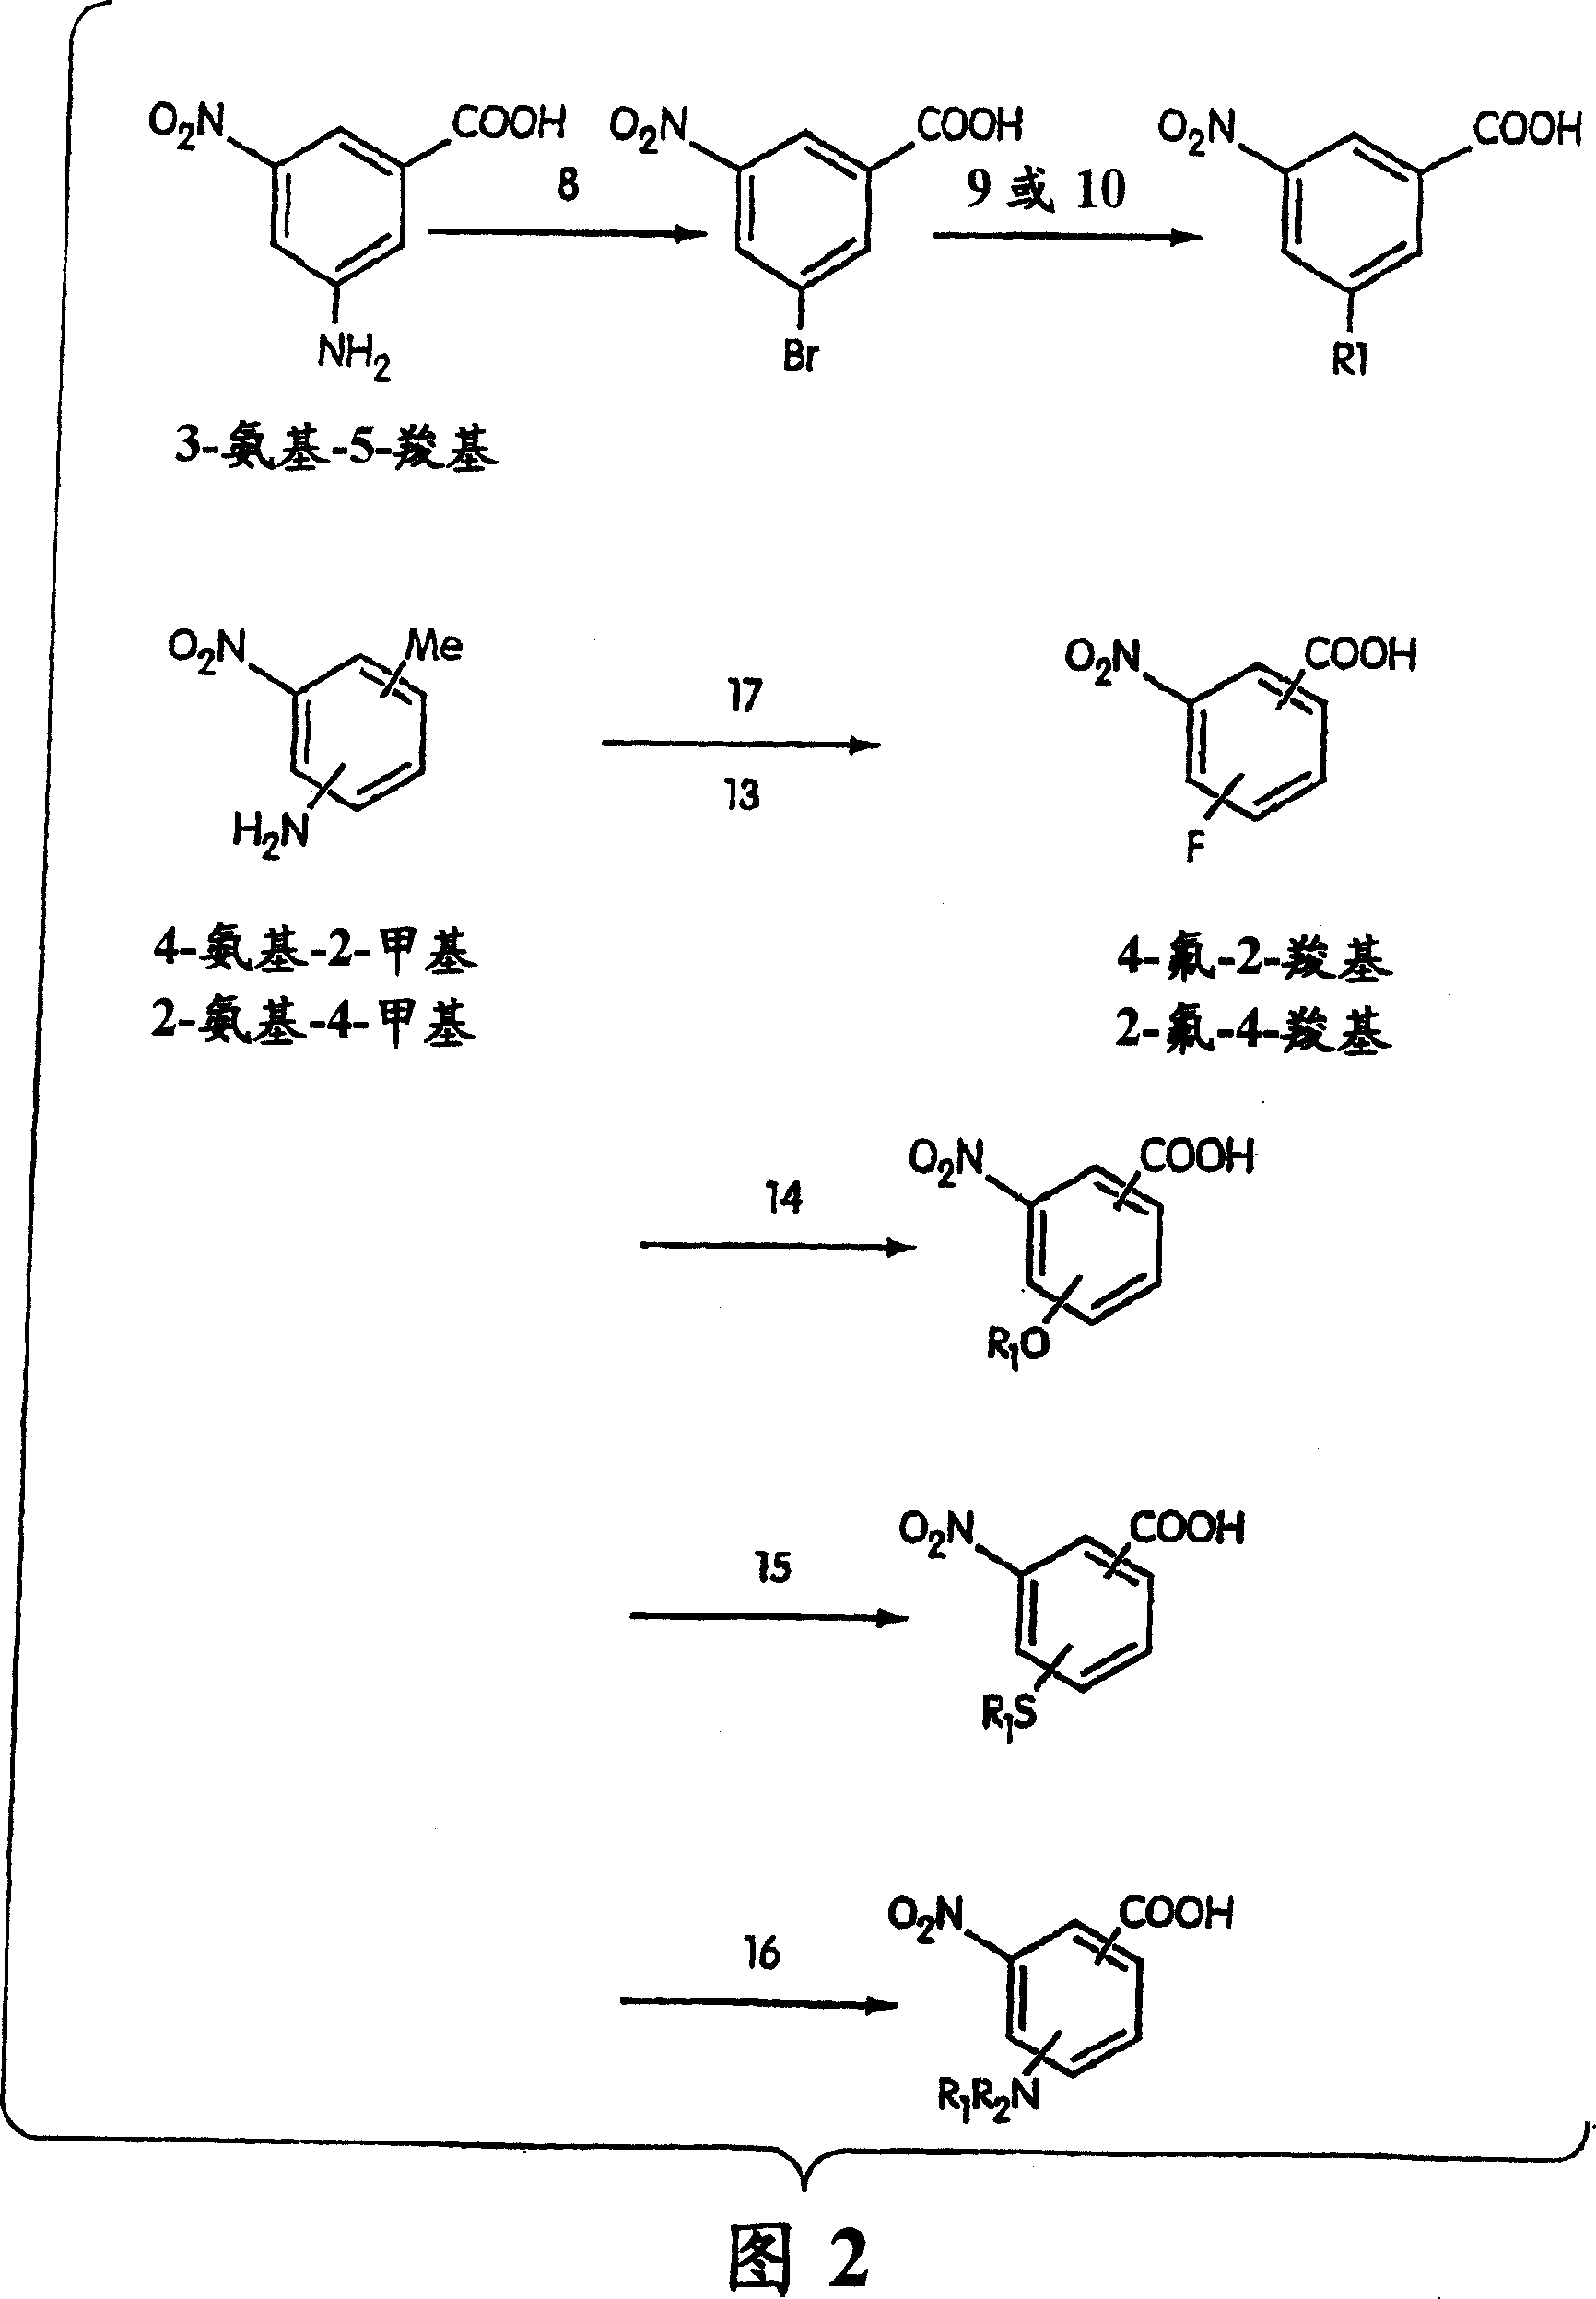 Mediators of hedgehog signaling pathways, compositions and uses related thereto